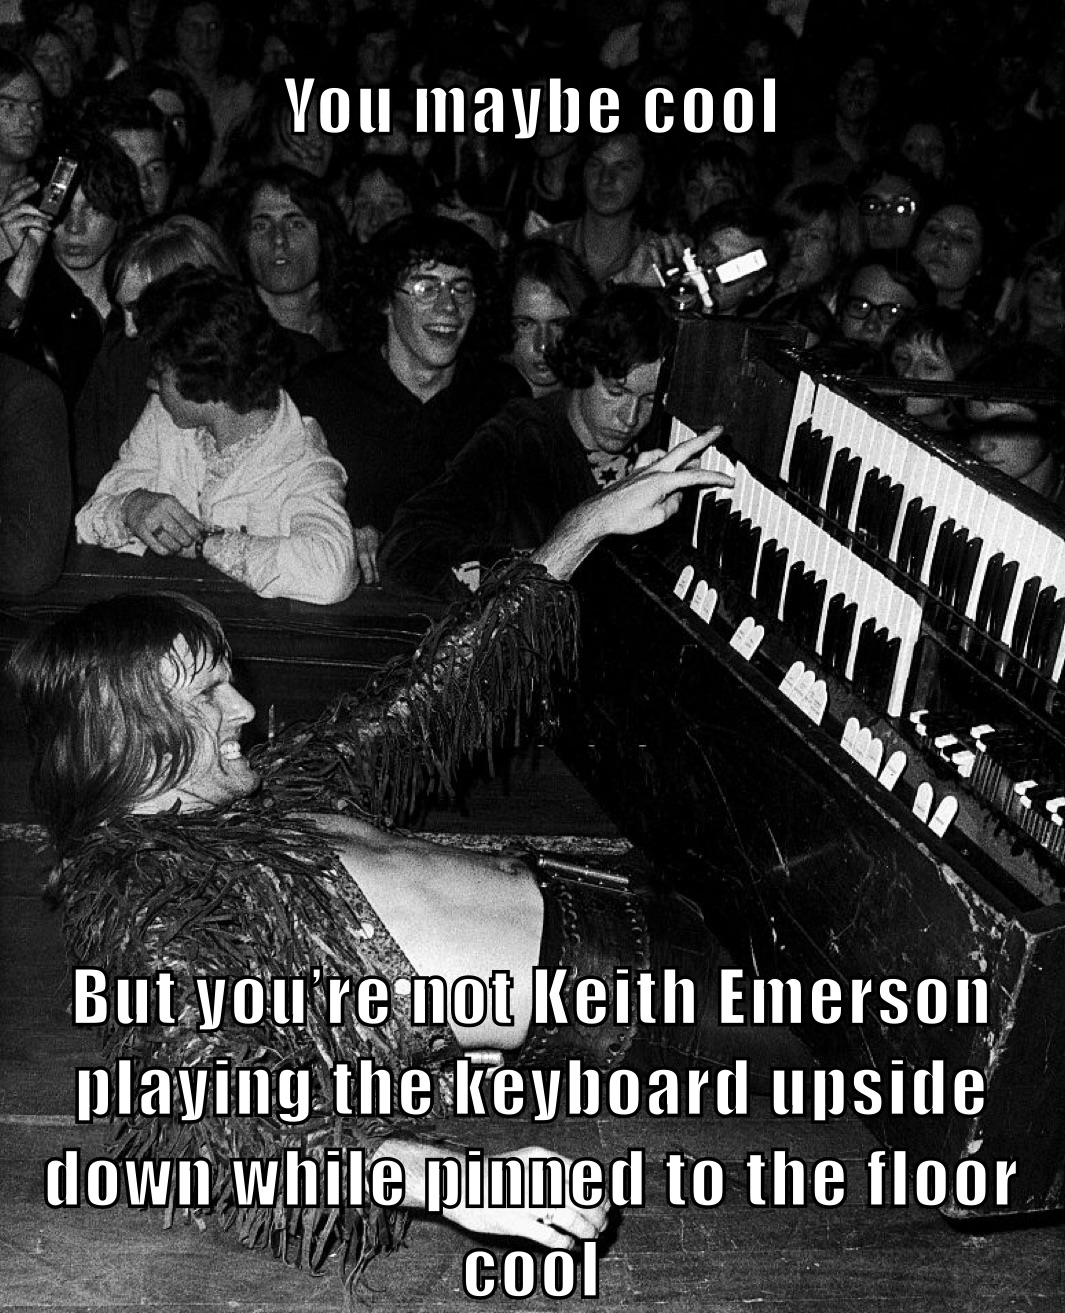 You maybe cool But you’re not Keith Emerson playing the keyboard upside down while pinned to the floor cool